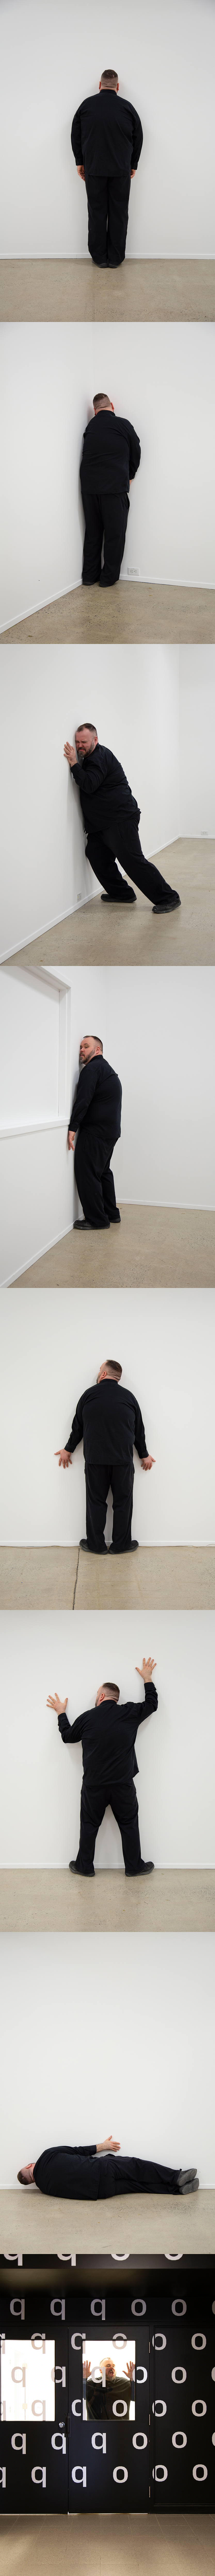 Steve Giasson. Performance invisible n&deg; 139 (Raser les murs). Reenactment D&rsquo;Endre T&oacute;t. &Ouml;r&uuml;l&ouml;k, ha a falat b&aacute;mulhatom (I am glad if I can stare at the wall). 1971-1976/2015. Reenactment de Terry Fox. Corner Push. Mai 1970. Reenactment de Terry Fox. Wall Push. F&eacute;vrier 1970. D&rsquo;apr&egrave;s Jiř&iacute; Kovanda. XXX Pressing myself as close as I can to the wall, I make my way around the whole room; There are people in the middle of the room watching&hellip; &nbsp;November 26, 1977, Hradec Kralove. Reenactment de Bruce Nauman. Body Pressure. 1974. D&rsquo;apr&egrave;s le reenactment de Marina Abramović. Bruce Nauman, Body Pressure. 1974. [Seven Easy Pieces]. 2005. Performeur : Steve Giasson. Cr&eacute;dit photographique : Daniel Roy. Galerie UQO, Gatineau. 21 avril 2018.